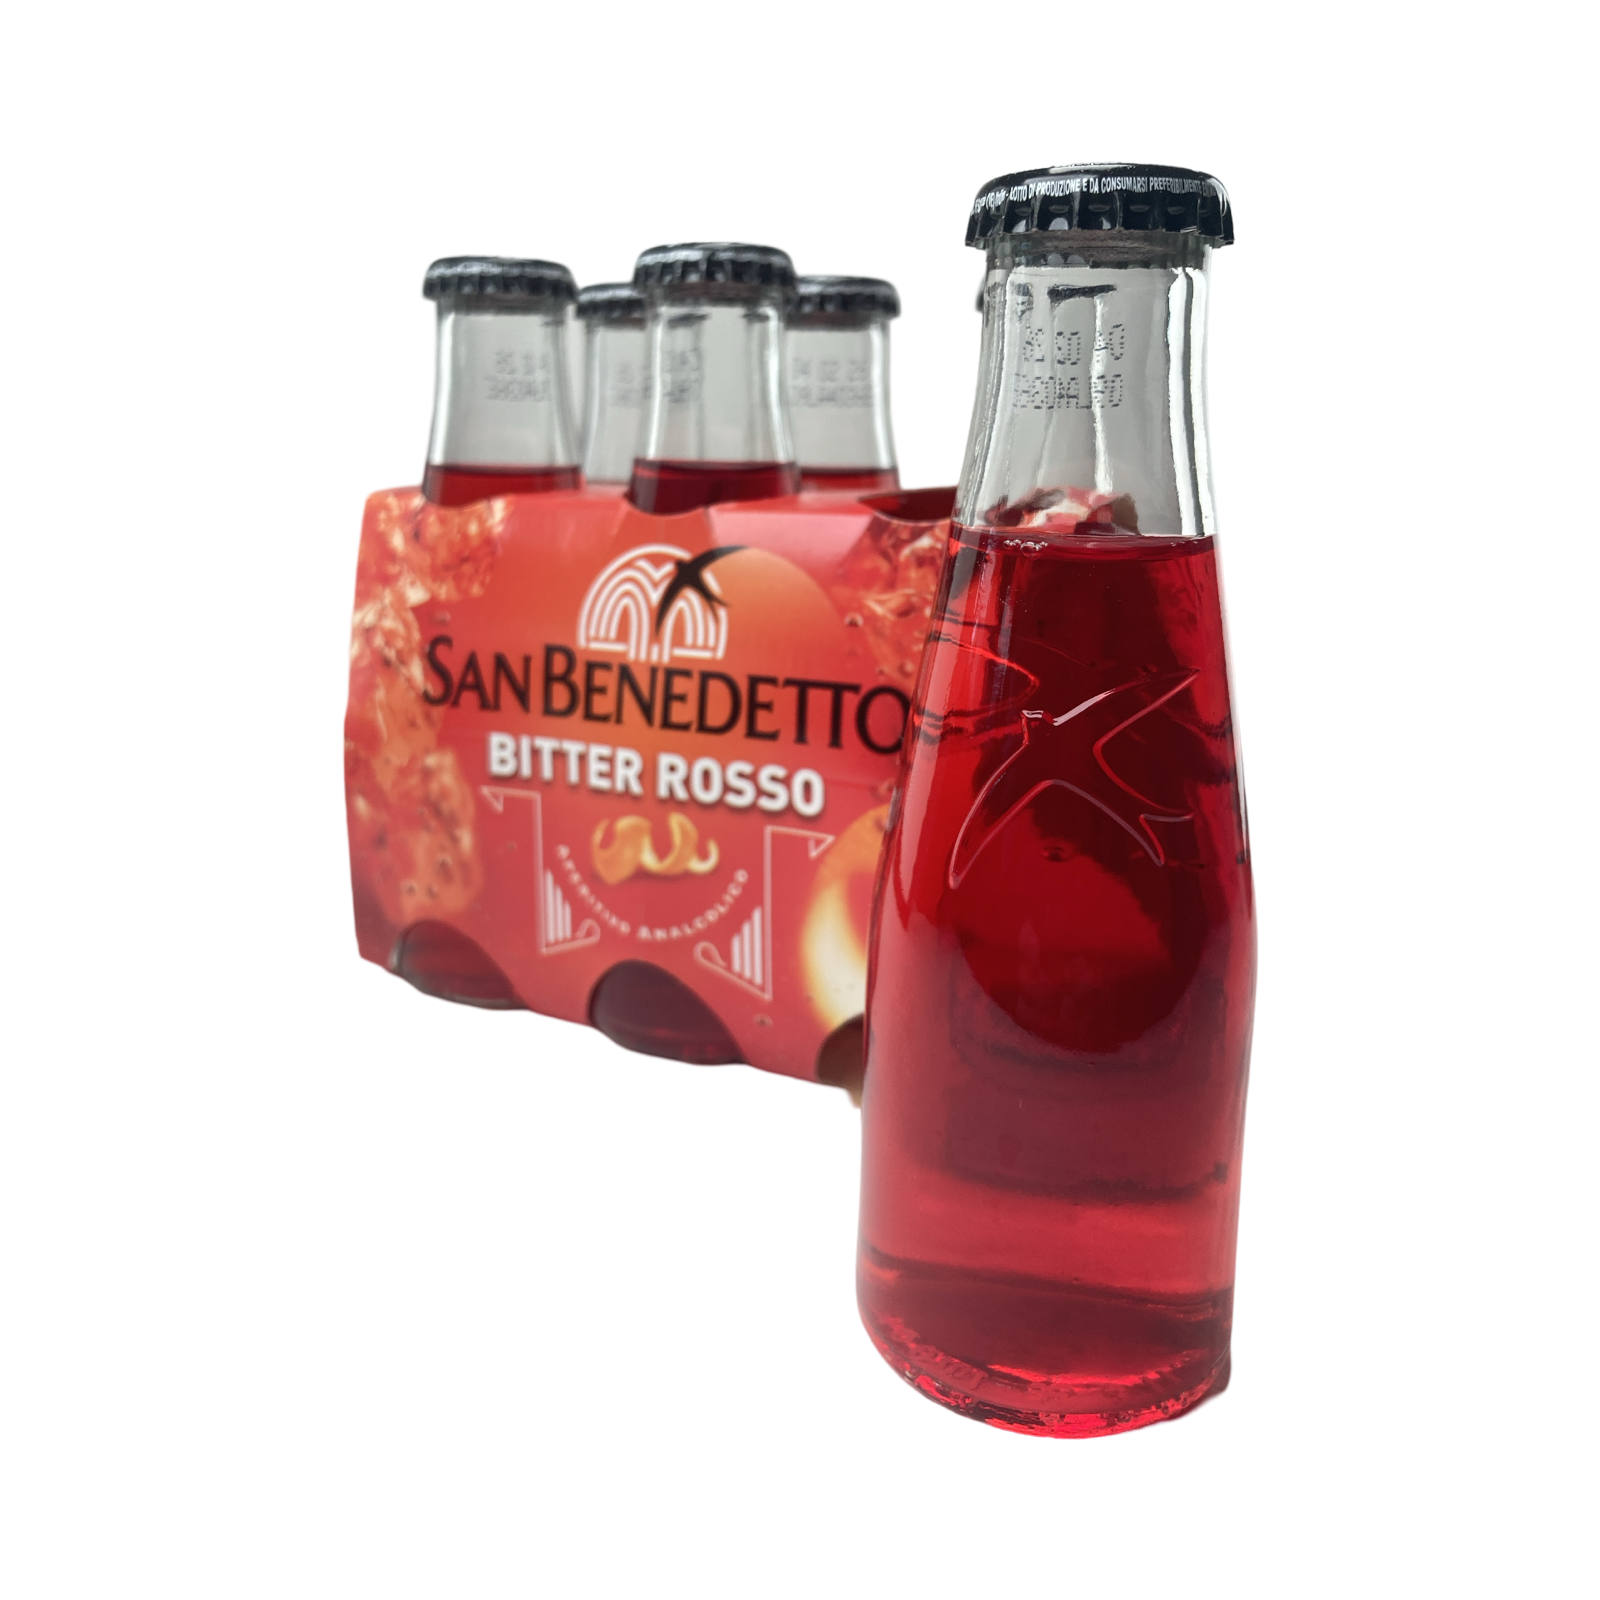 Ben´s Bitter Rosso San Benedetto 6x98ml